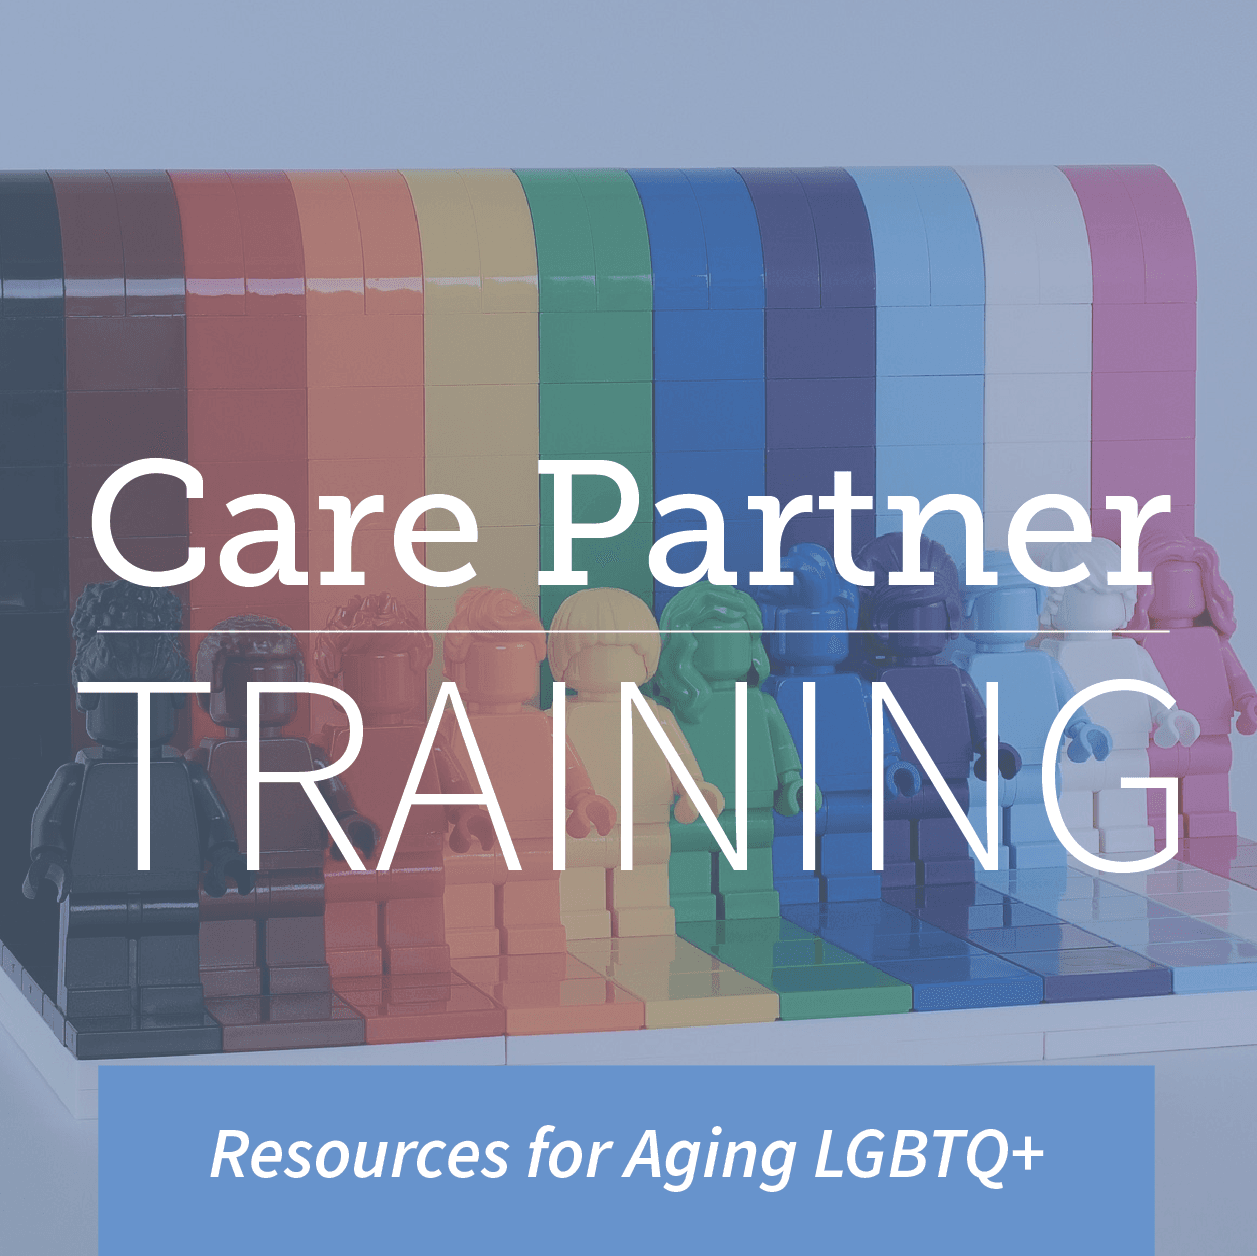 Resources for Aging LGBTQ+